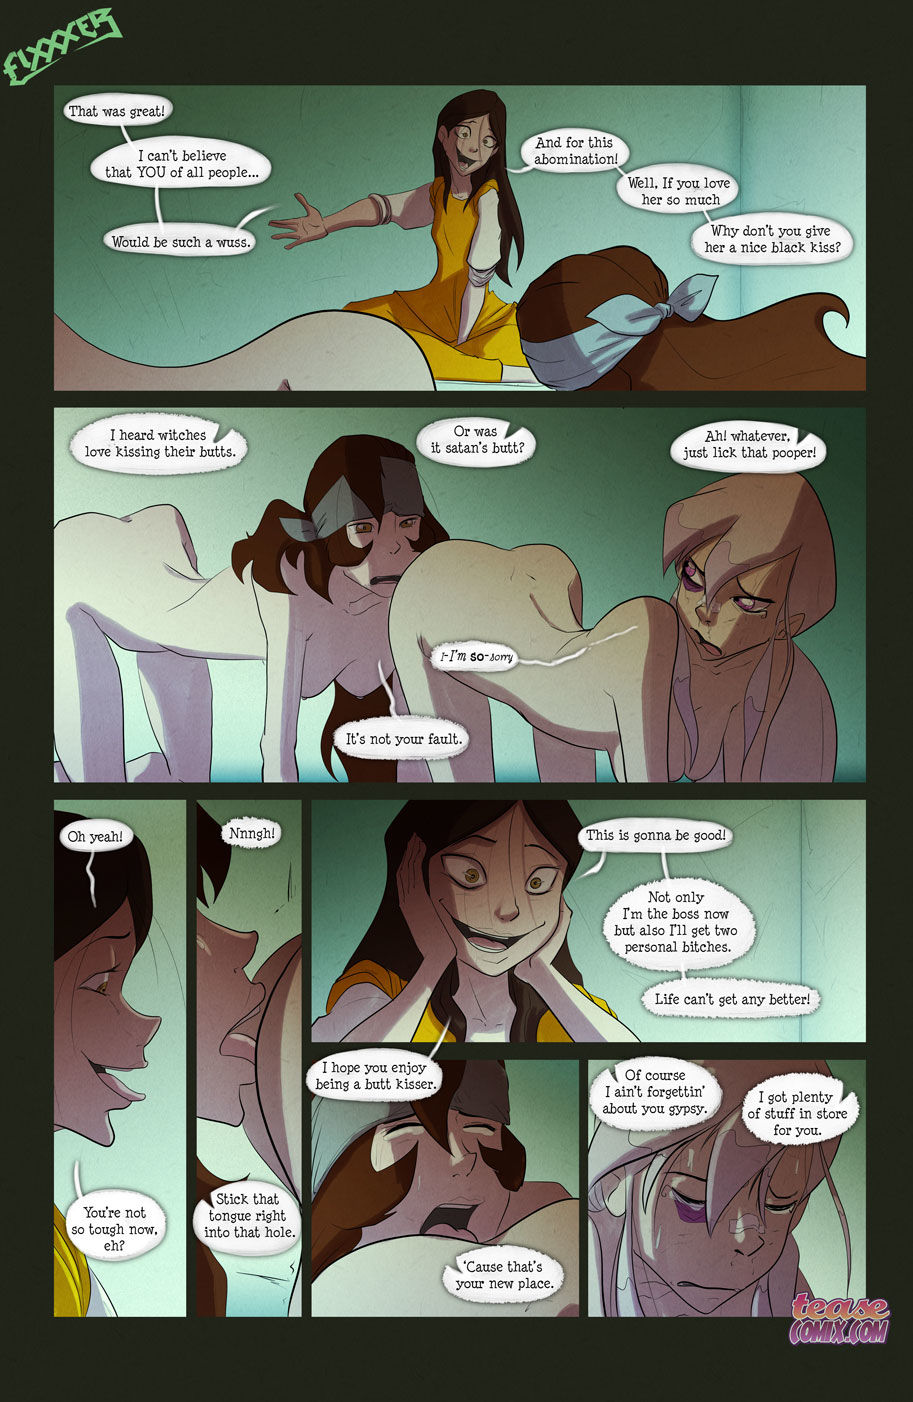 Fixxxer - The witch with no name, Ben 10 page 35